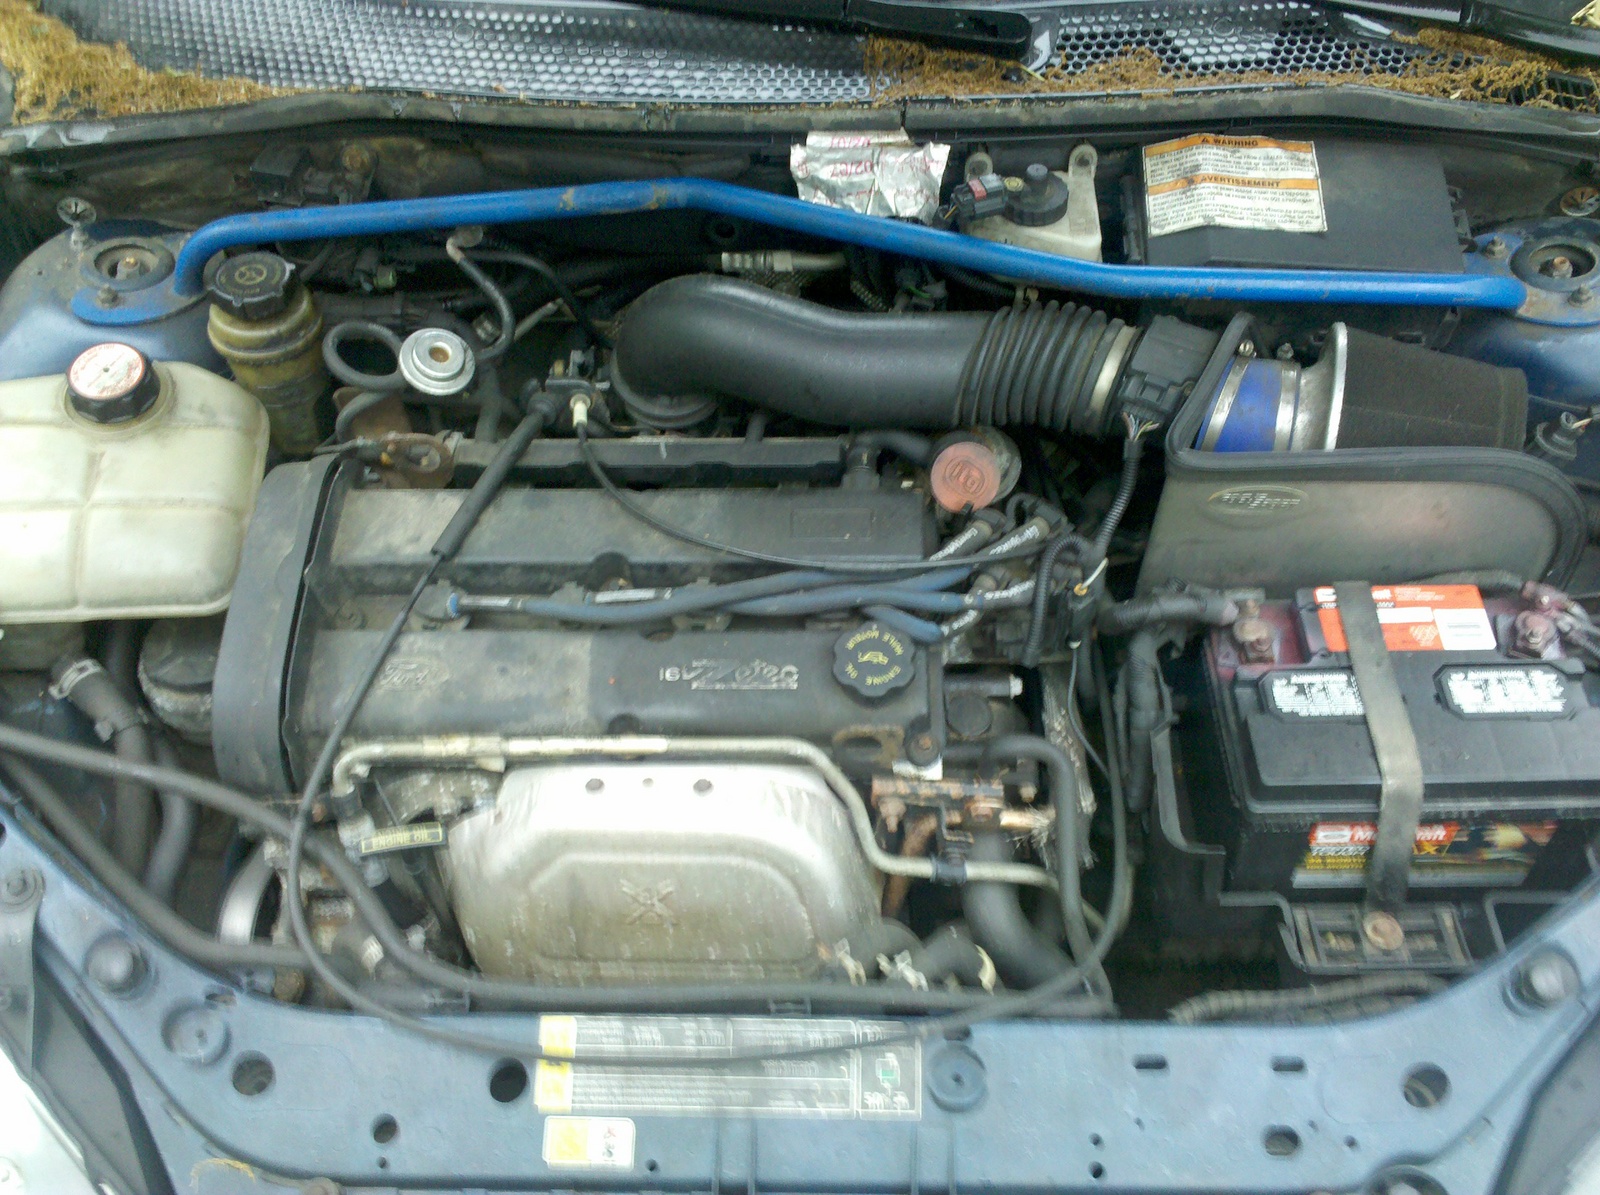 2002 Ford focus zts weight #1